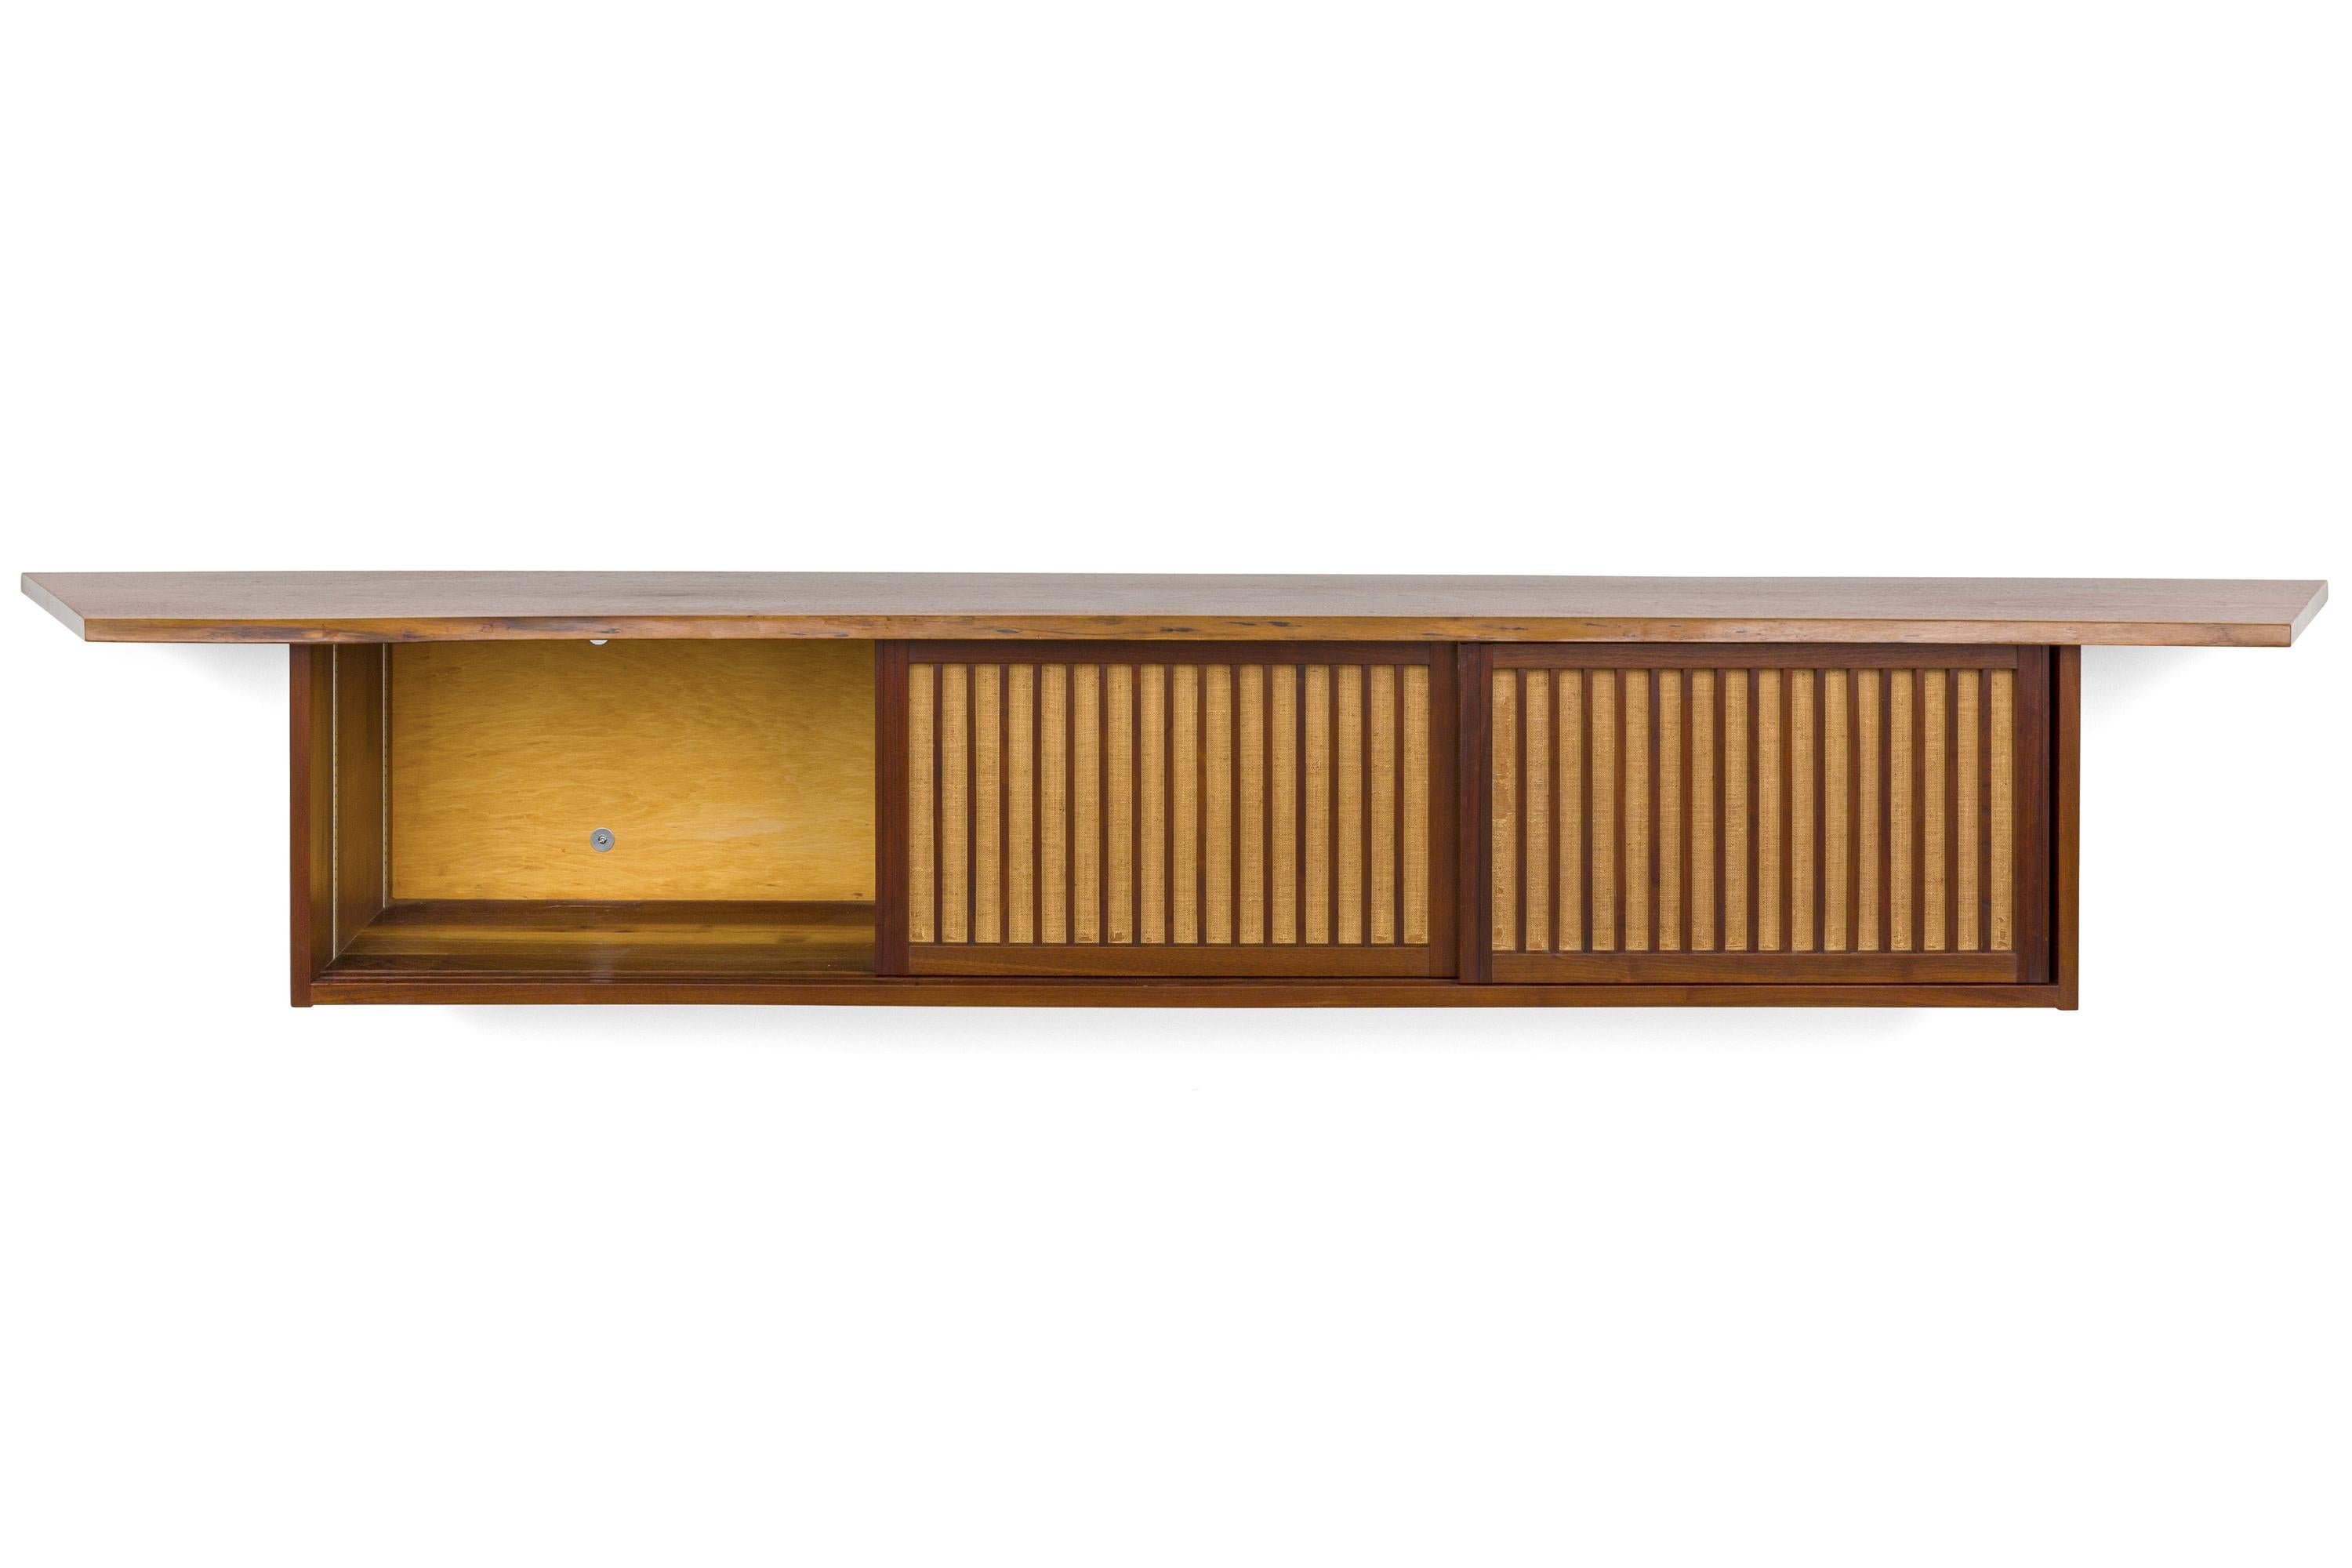 An outstanding example of Nakashima's distinctive hanging cabinets. It has an uncommon interior with several drawers as well as adjustable shelving. It's size alone is quite impressive. Size: 10' wide.